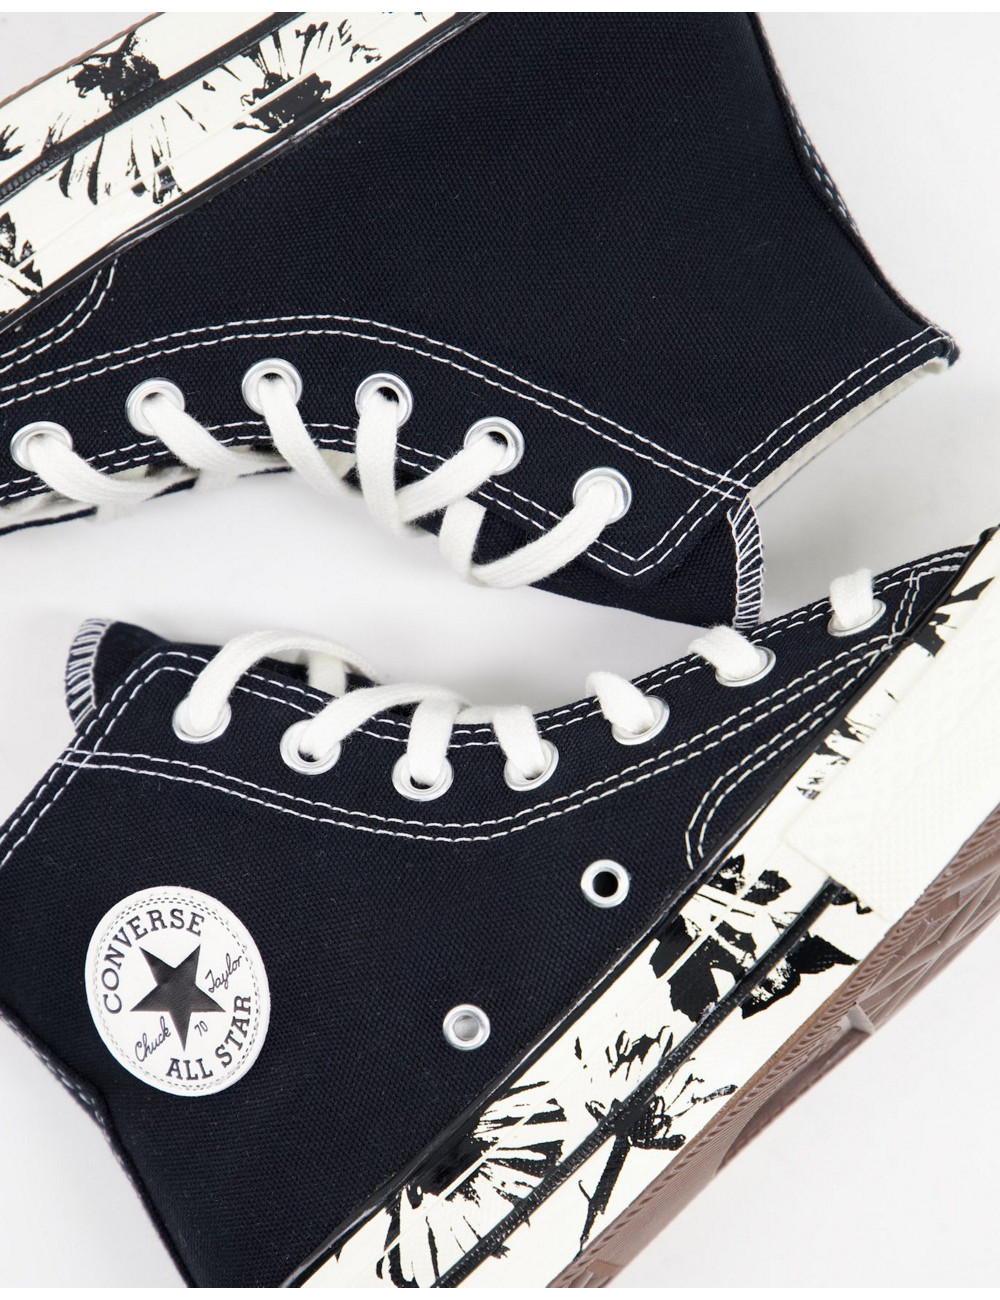 Converse Chuck 70's with...